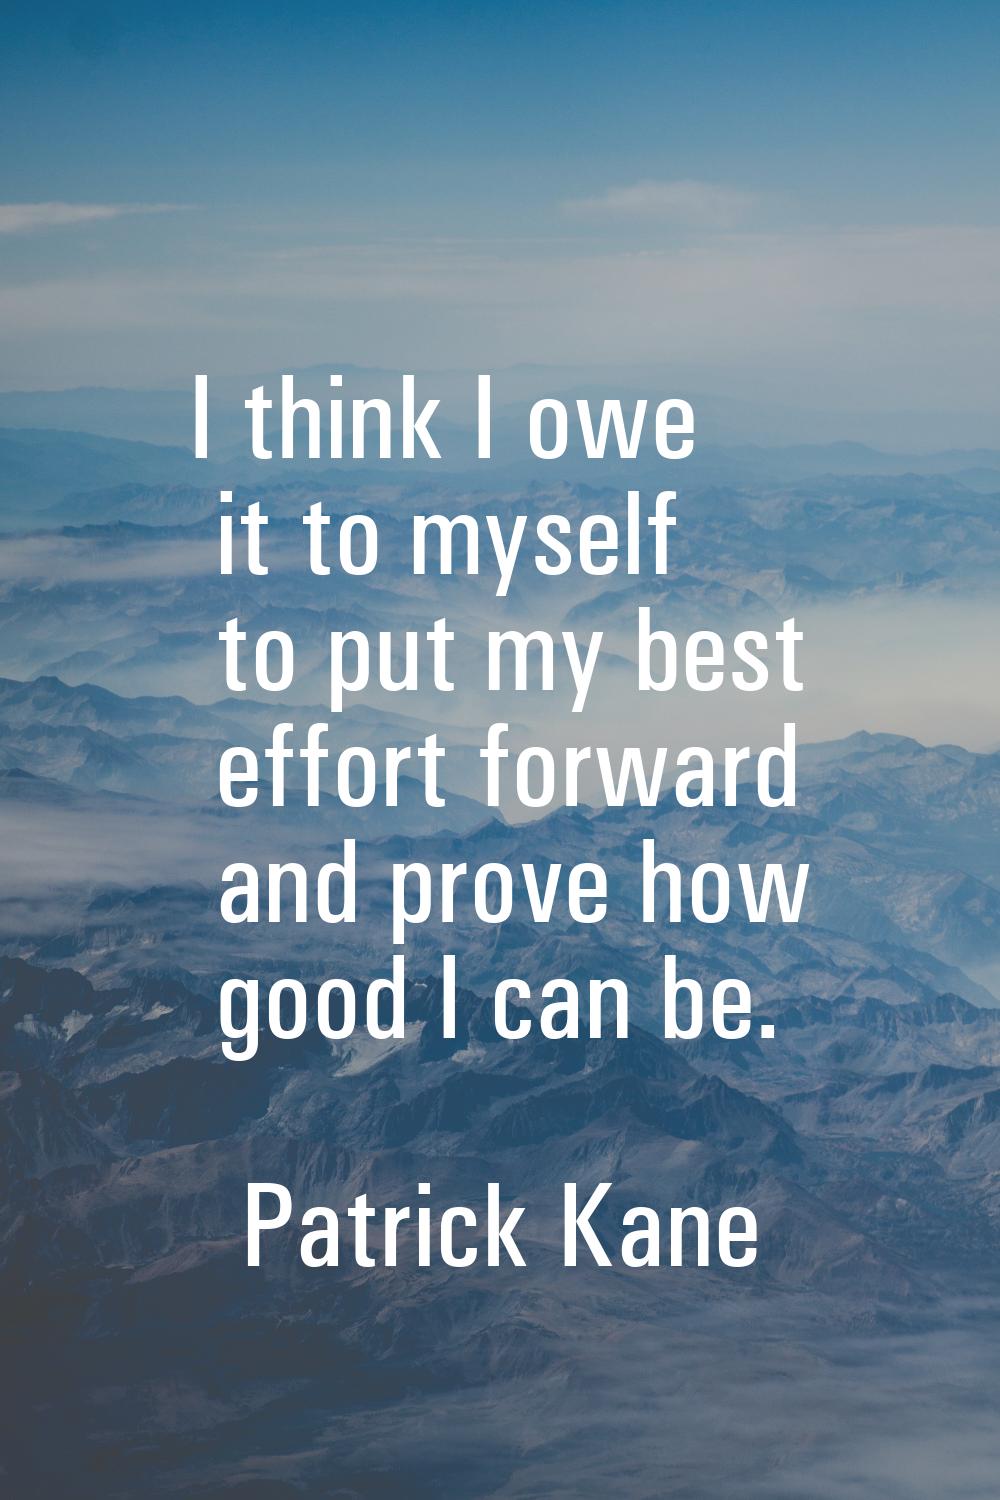 I think I owe it to myself to put my best effort forward and prove how good I can be.